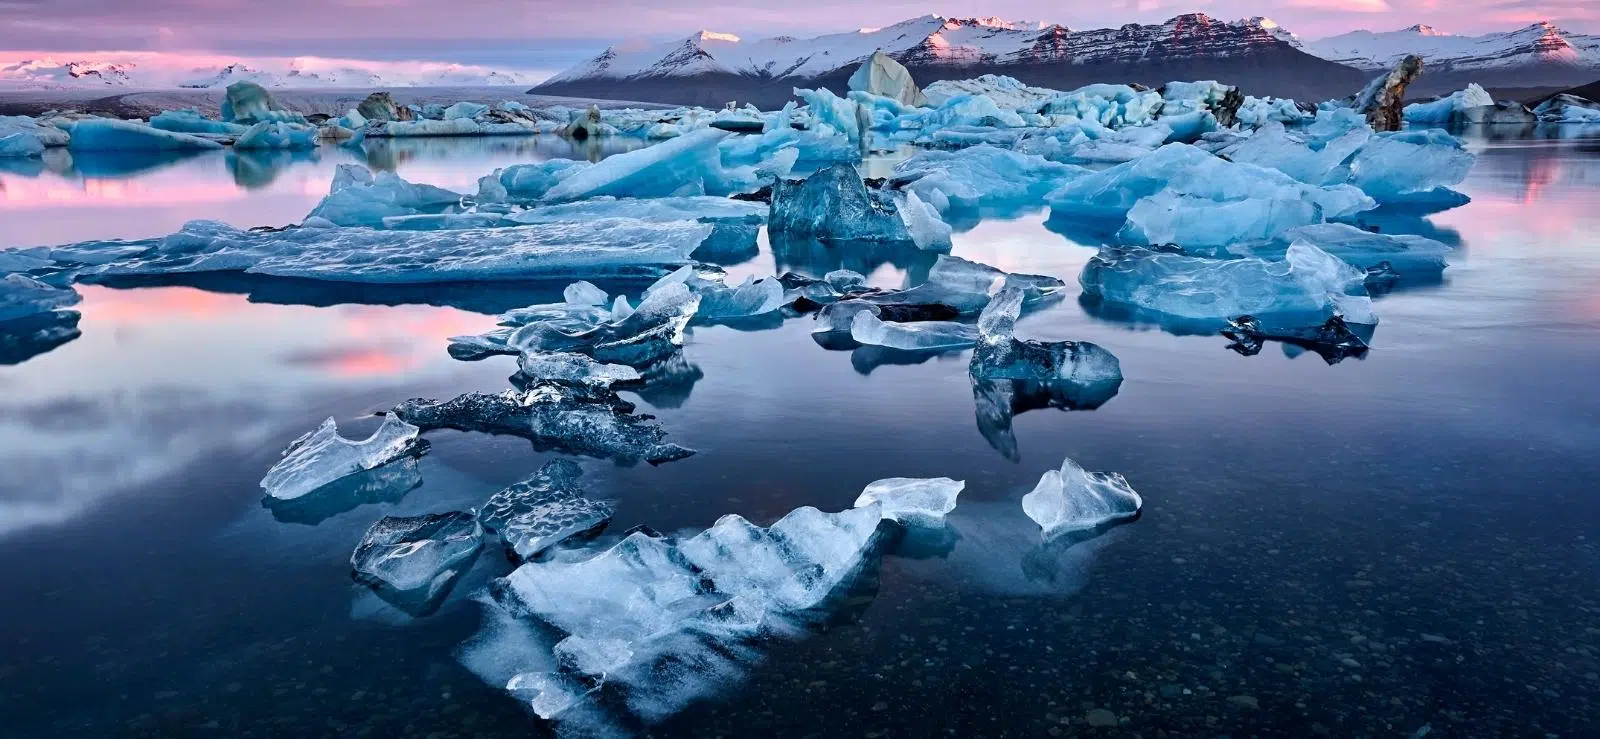 Ice blocks scattered along a black sand beach in Iceland